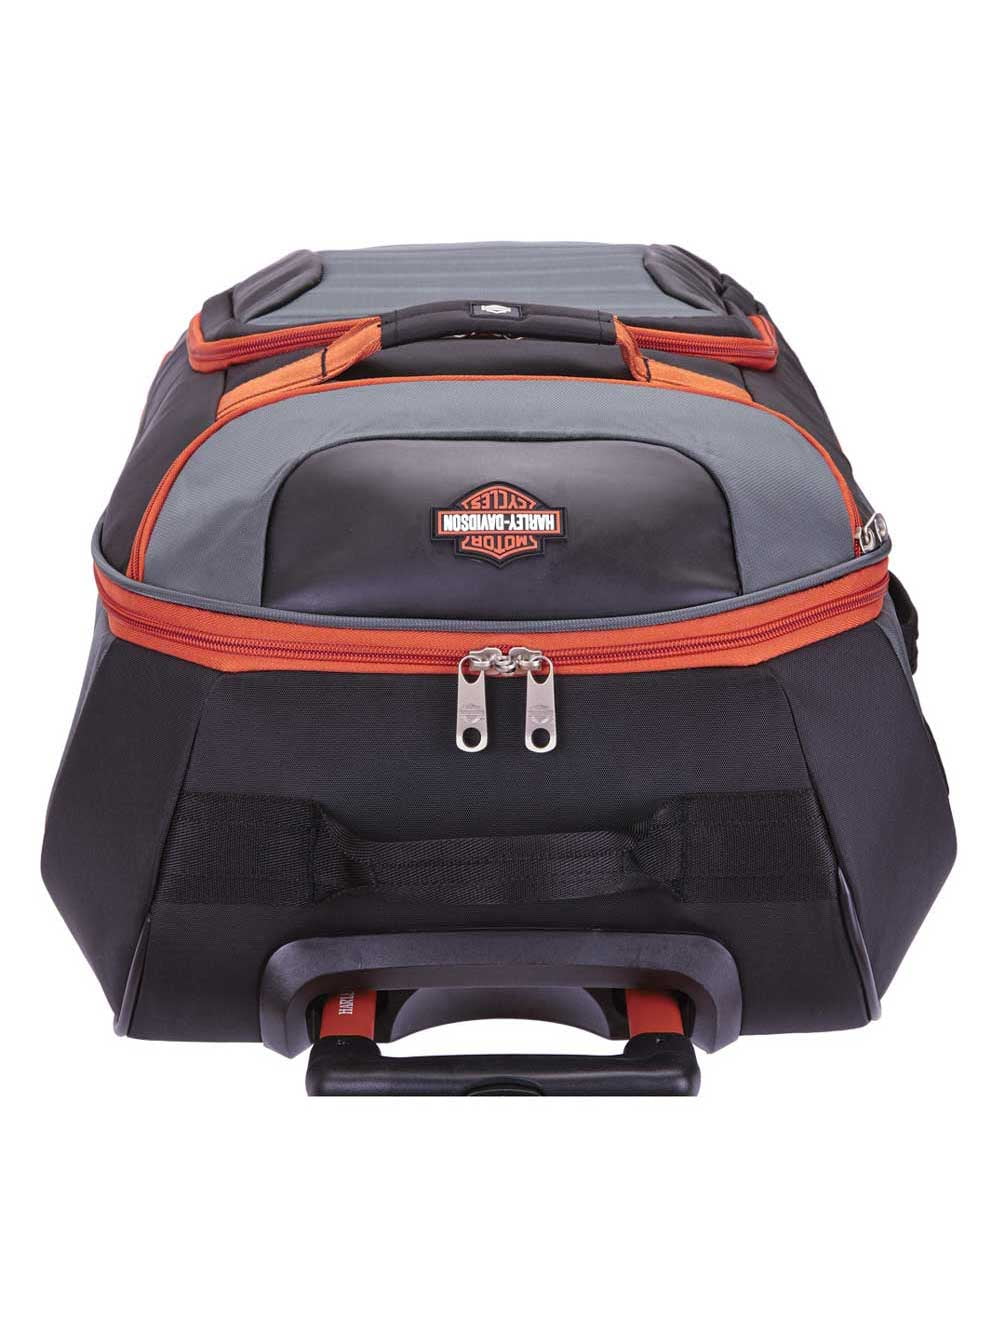 NEW Harley-Davidson Ombré Satchel and - Gatto Motorcycles